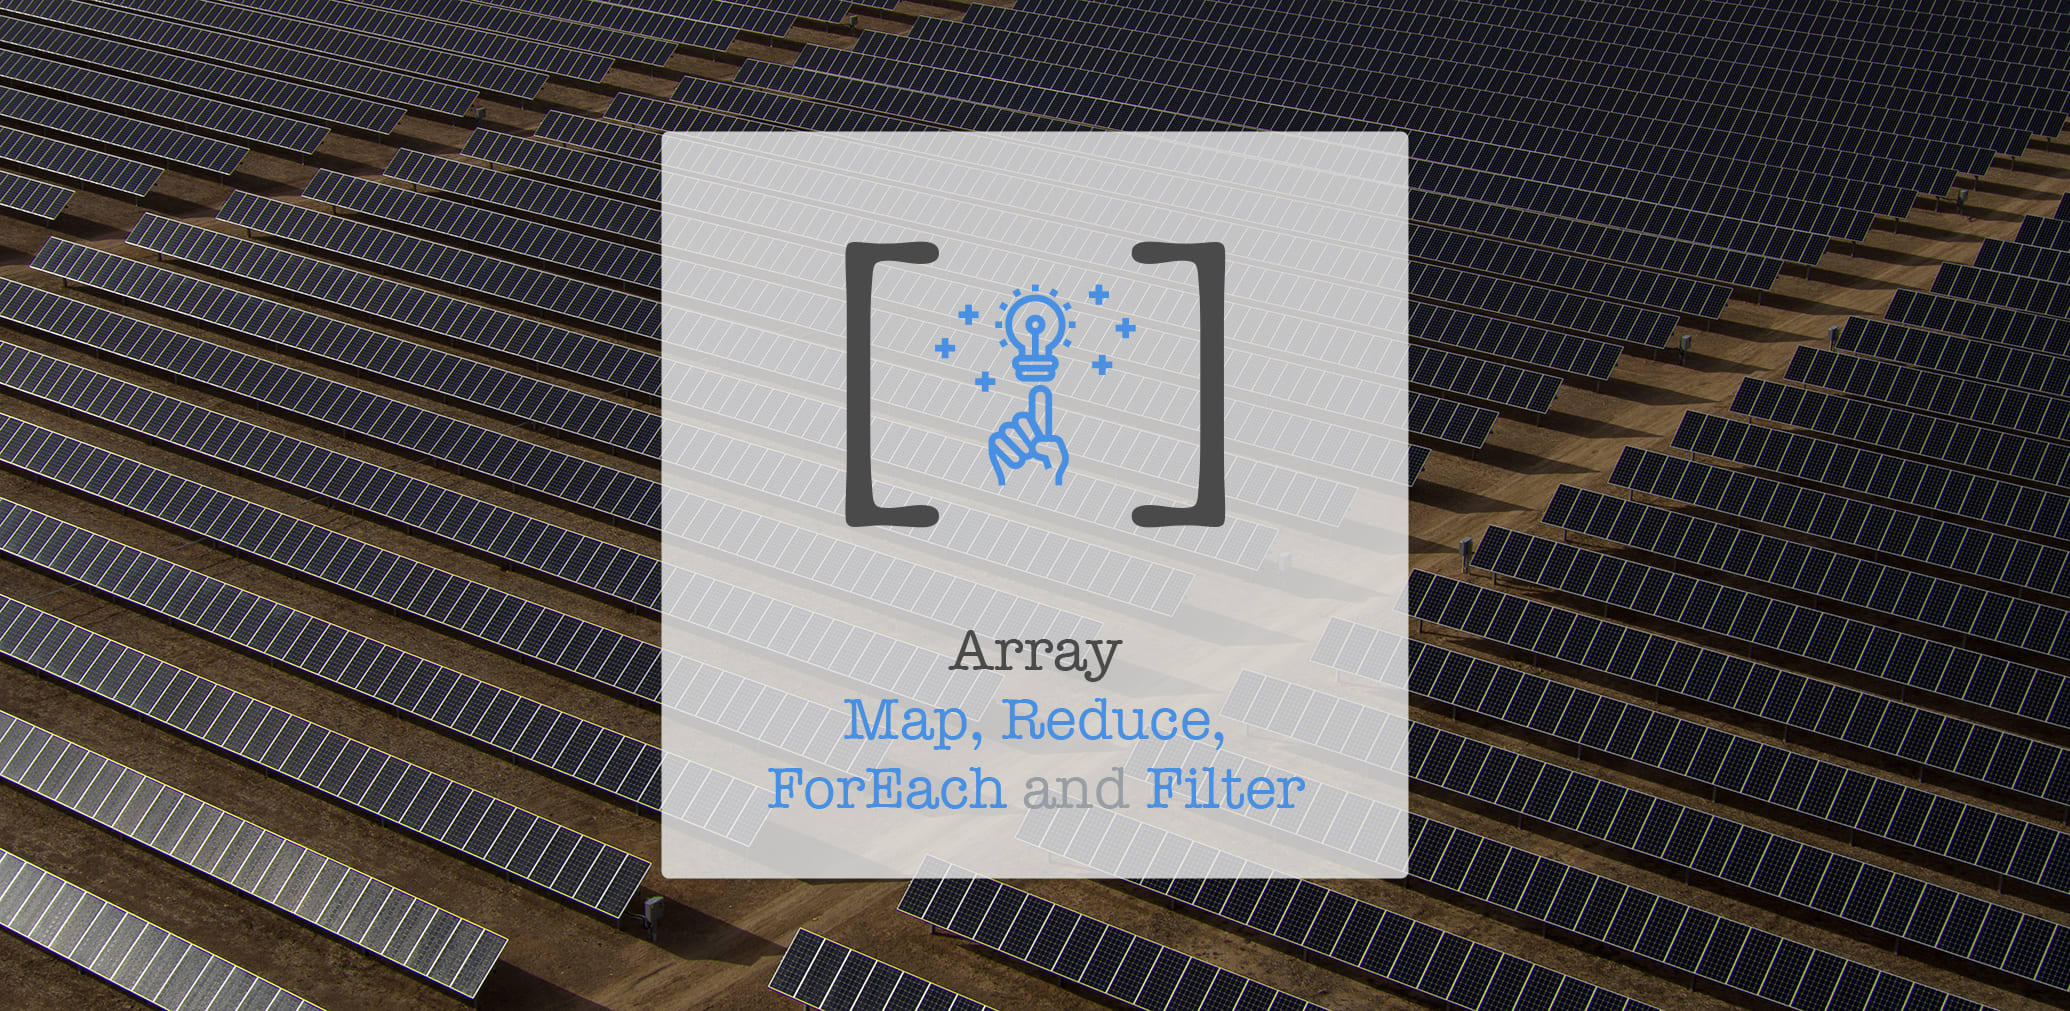 Brief guide to Map, Reduce, ForEach and Filter for Arrays